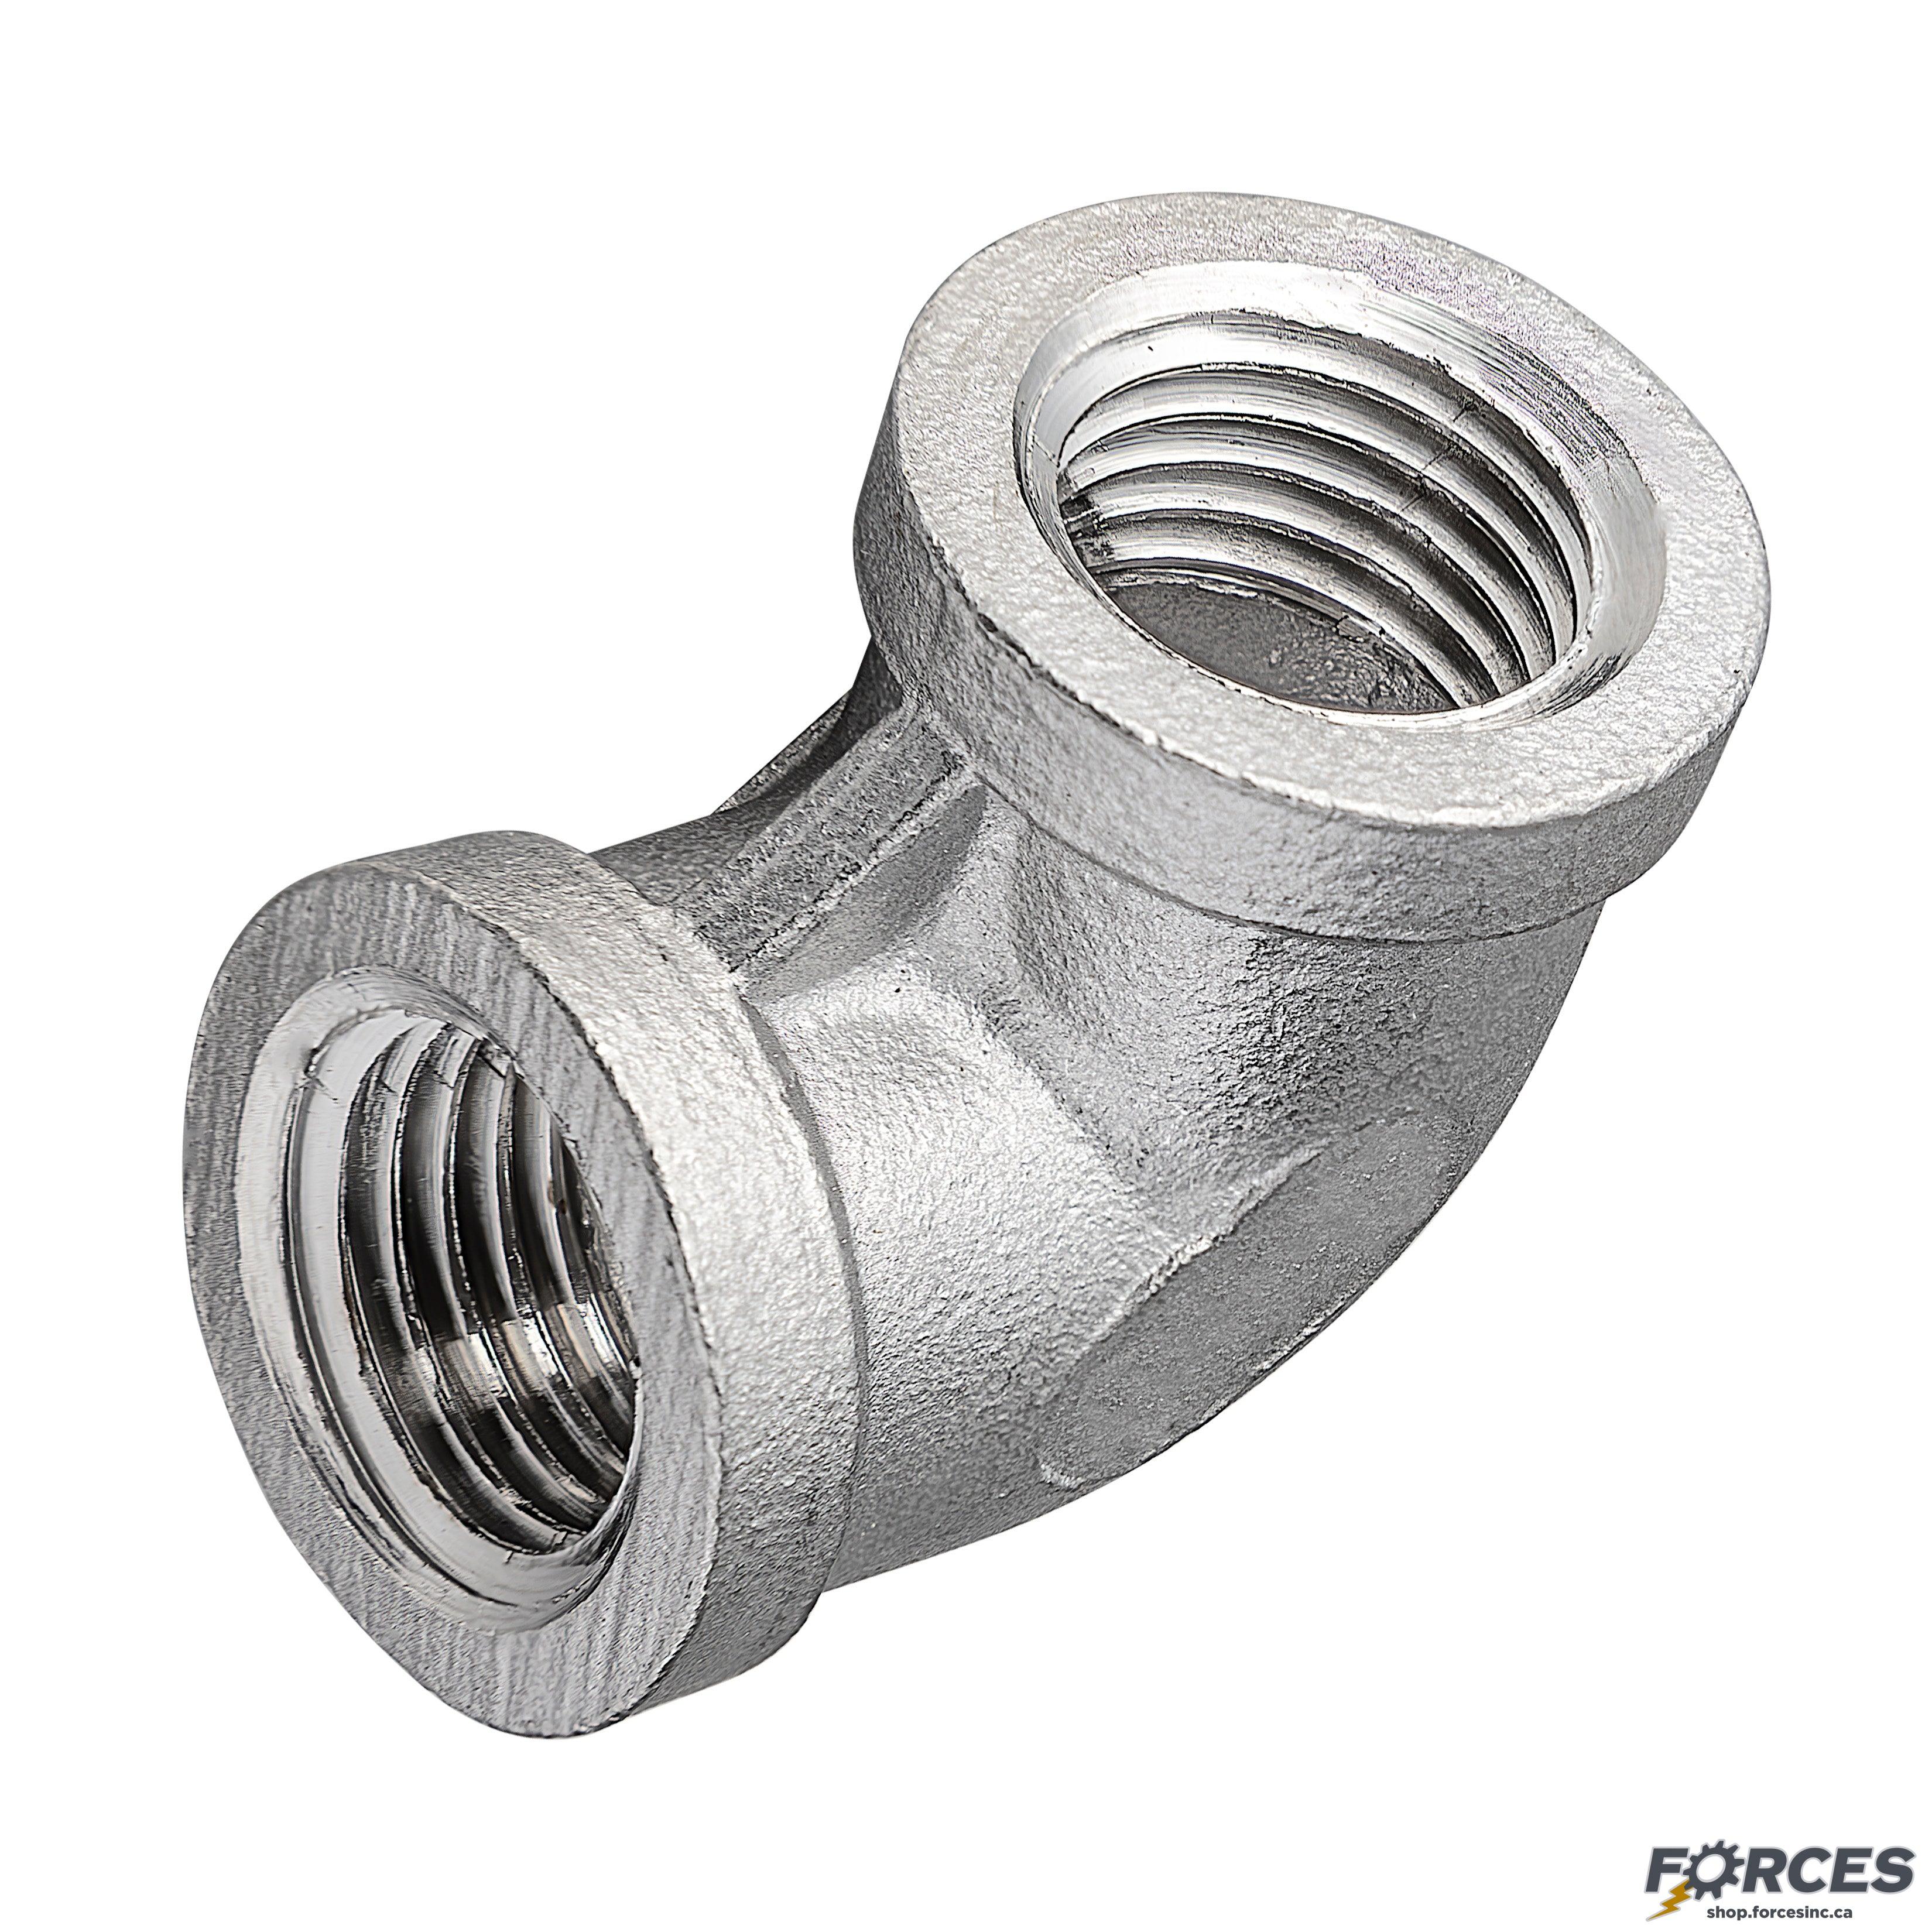 1/2" Elbow 90° NPT #150 - Stainless Steel 316 - Forces Inc